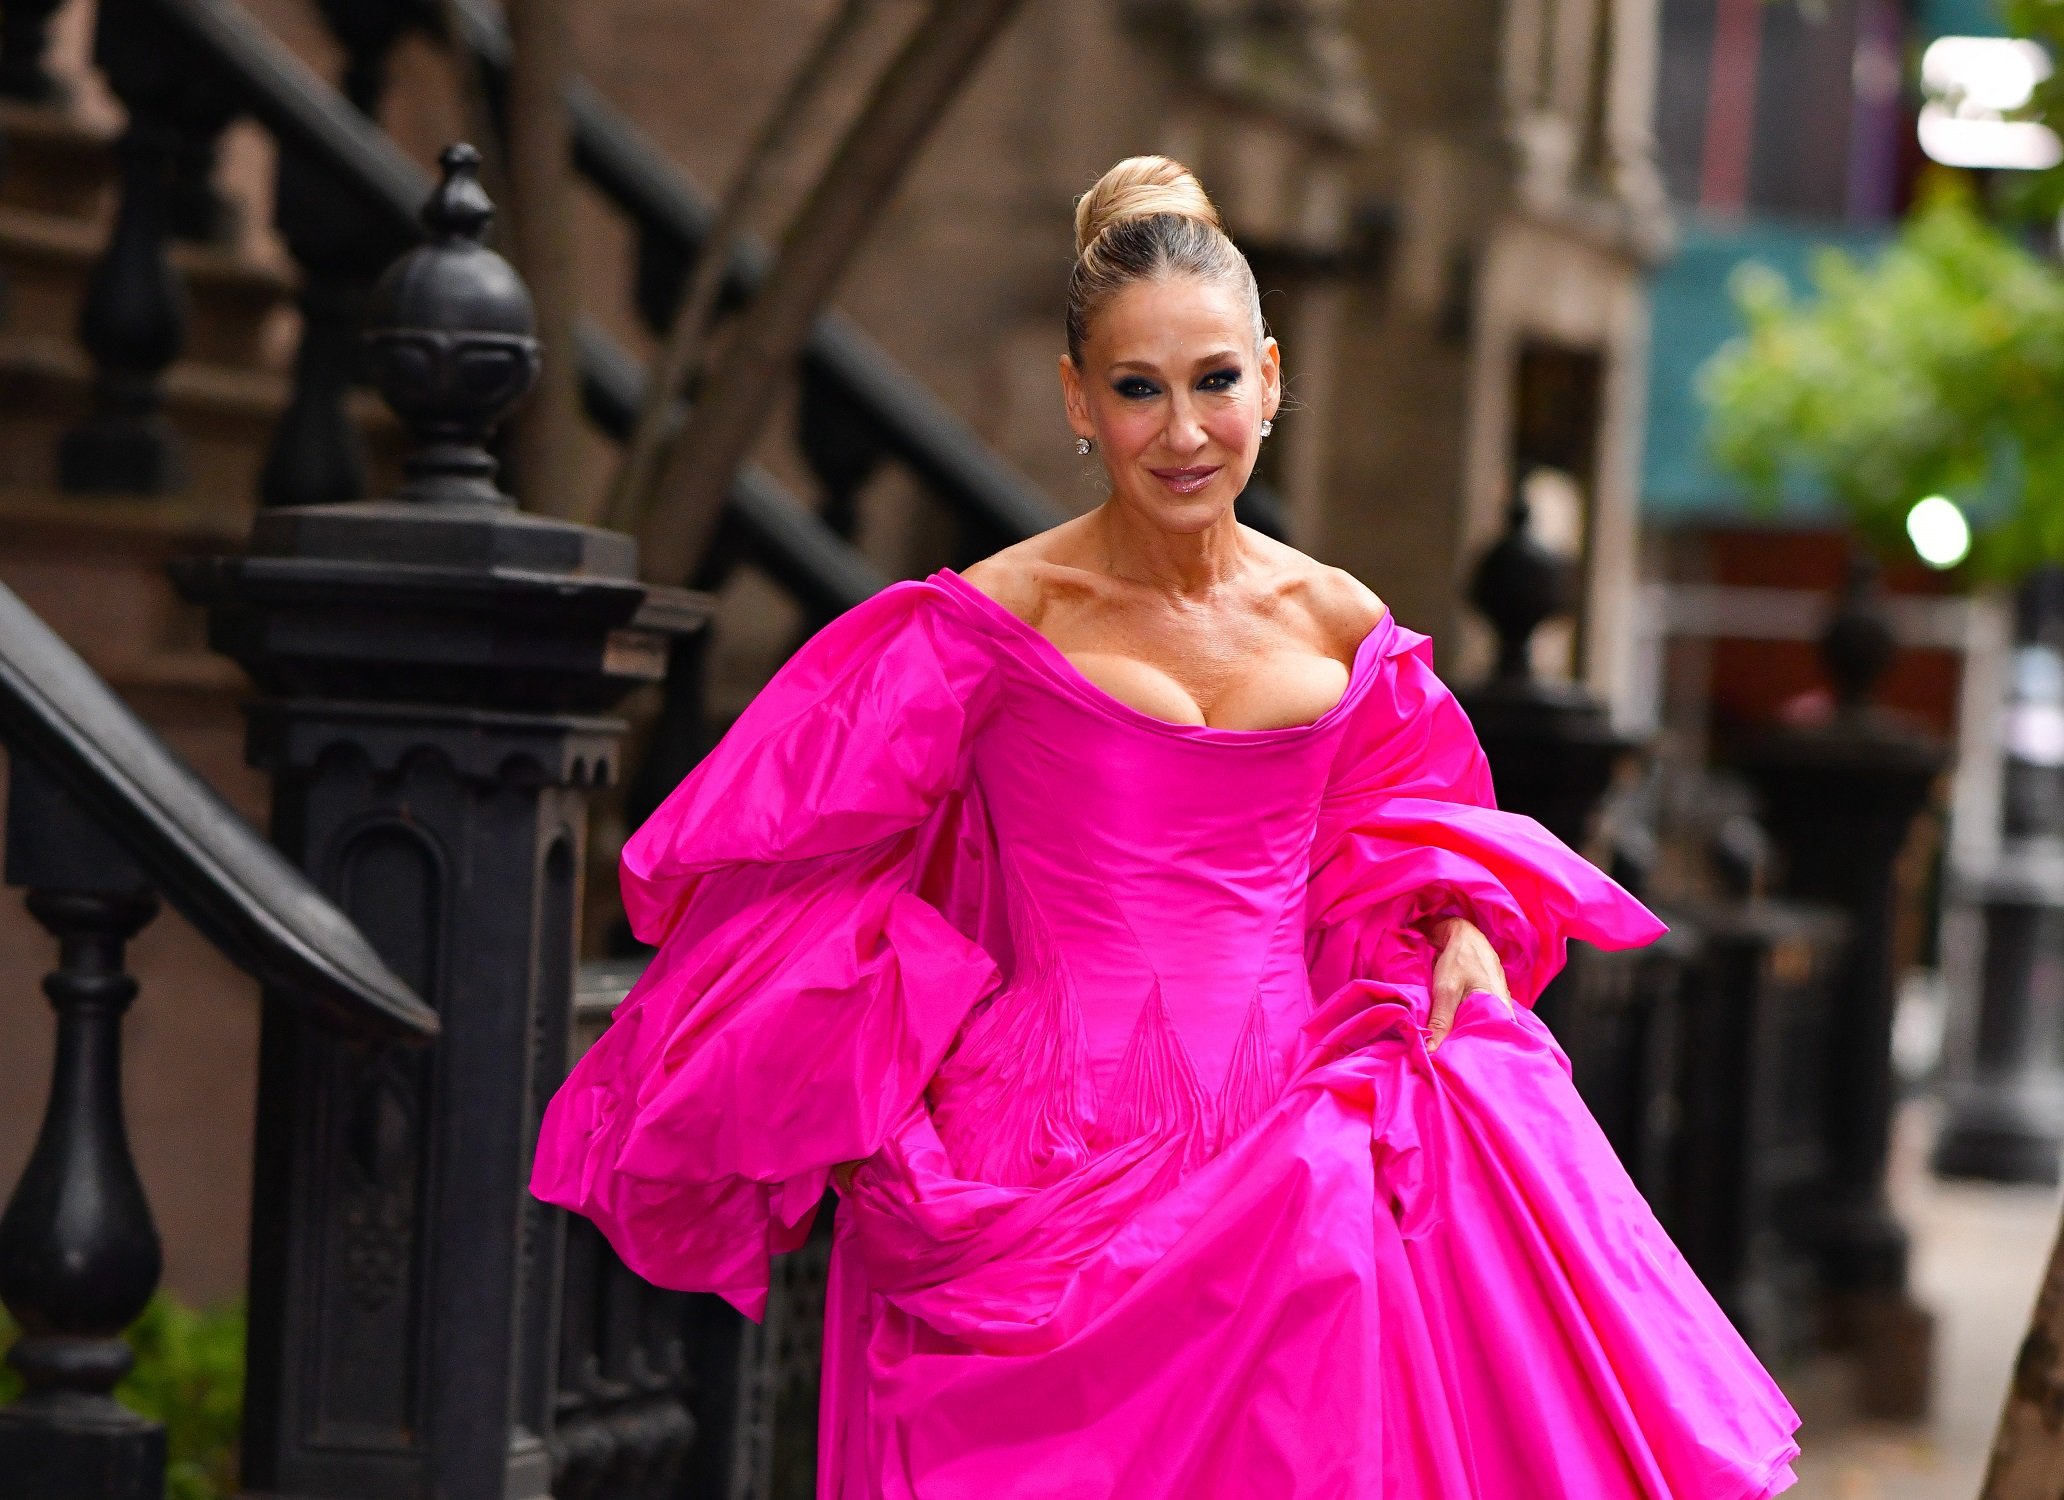 Sarah Jessica Parker in New York City in 2019